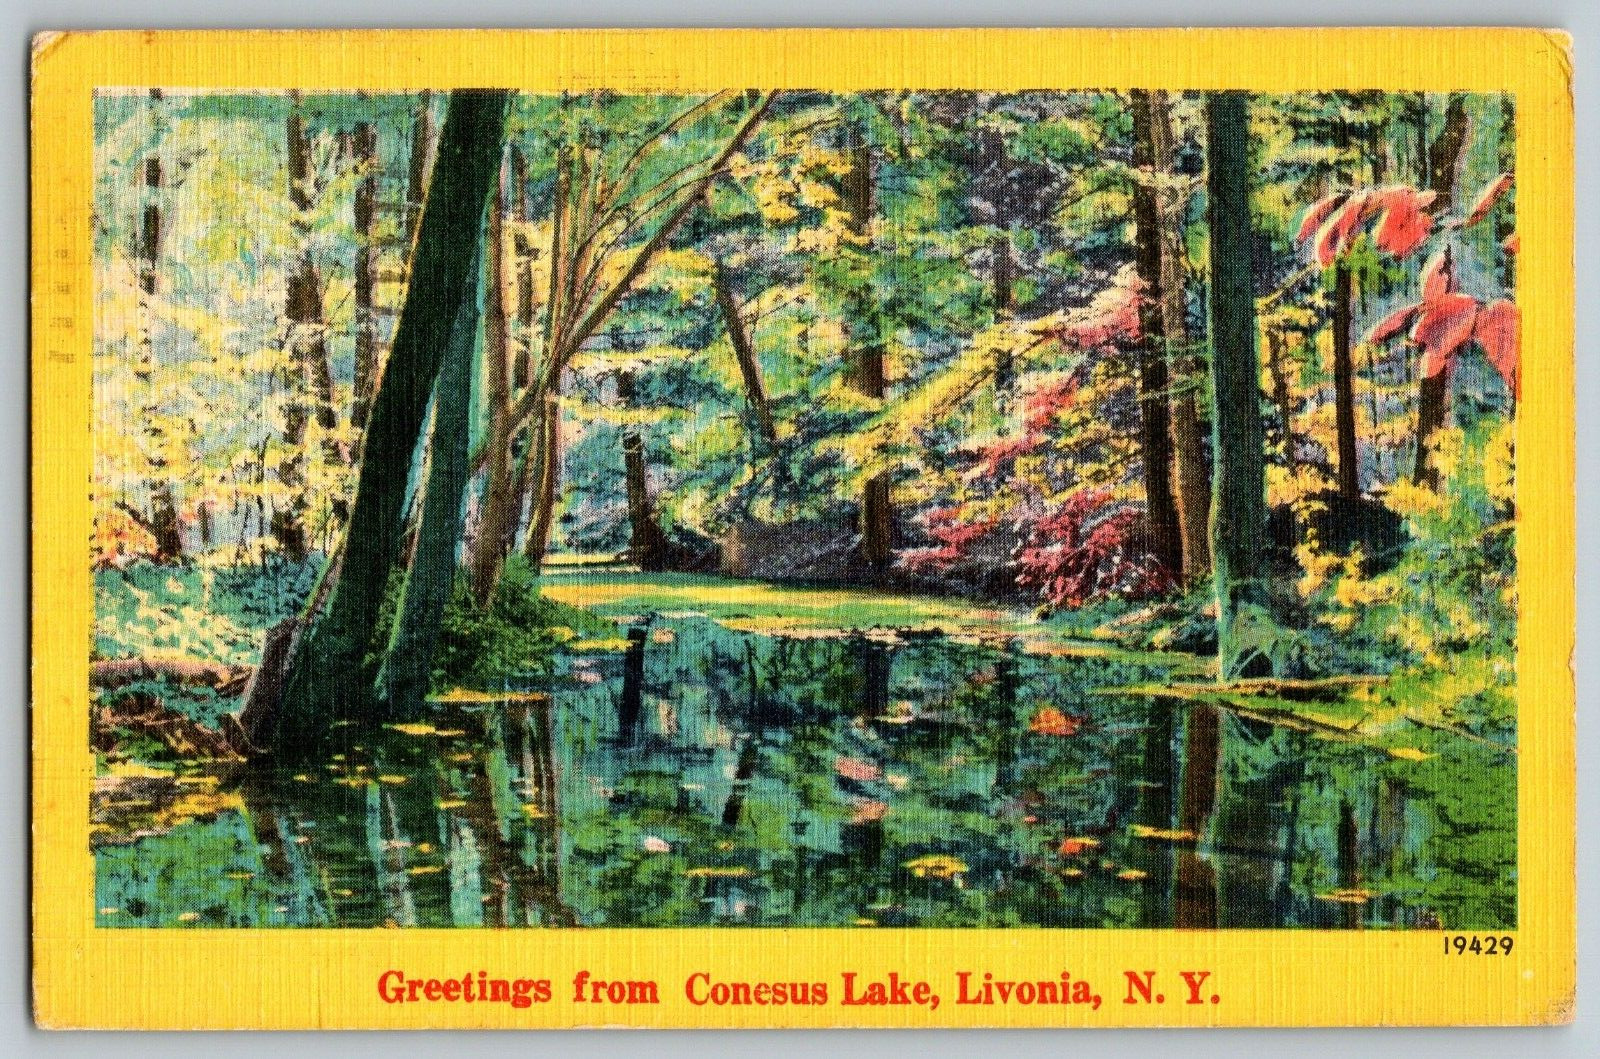 Livonia, New York - Greetings from Conesus Lake - Vintage Postcard - Posted